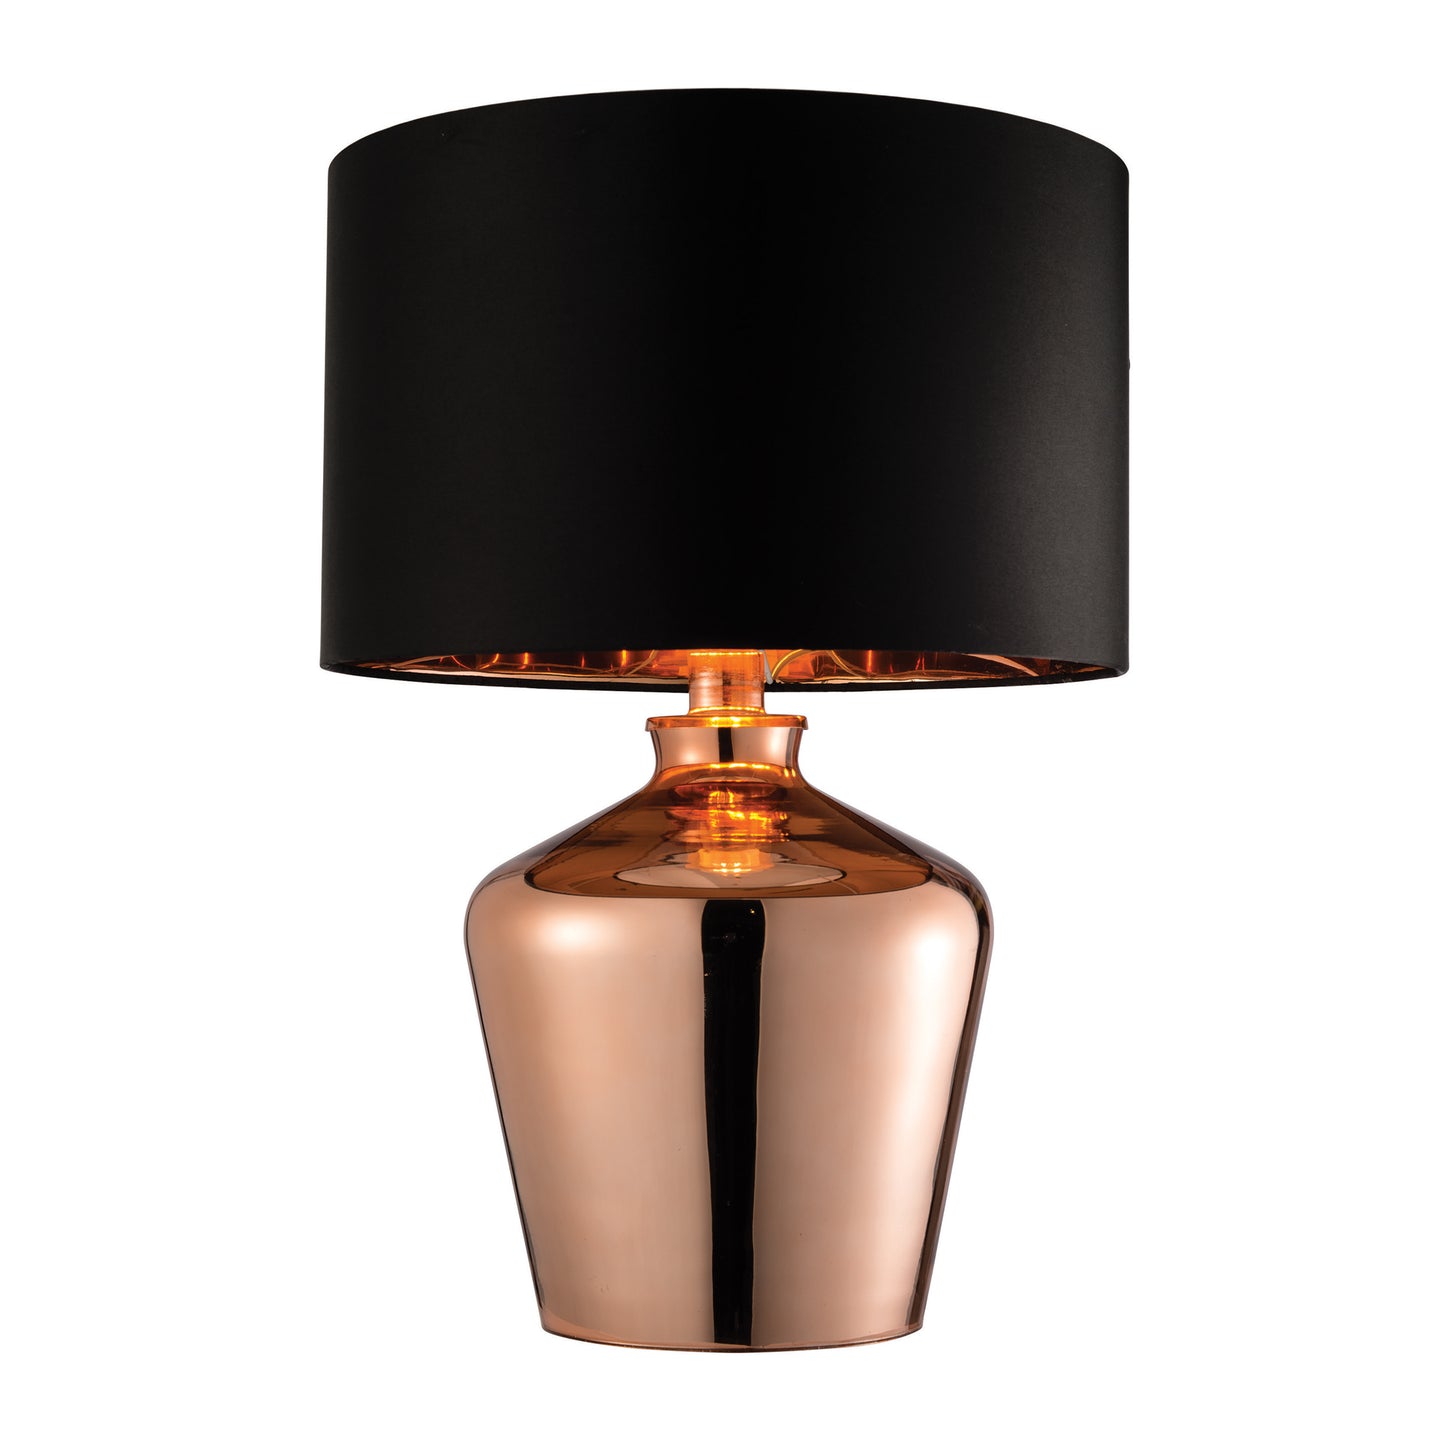 A home furniture piece - the Waldorf Table Lamp Copper from Kikiathome.co.uk - features a black shade, enhancing interior decor.